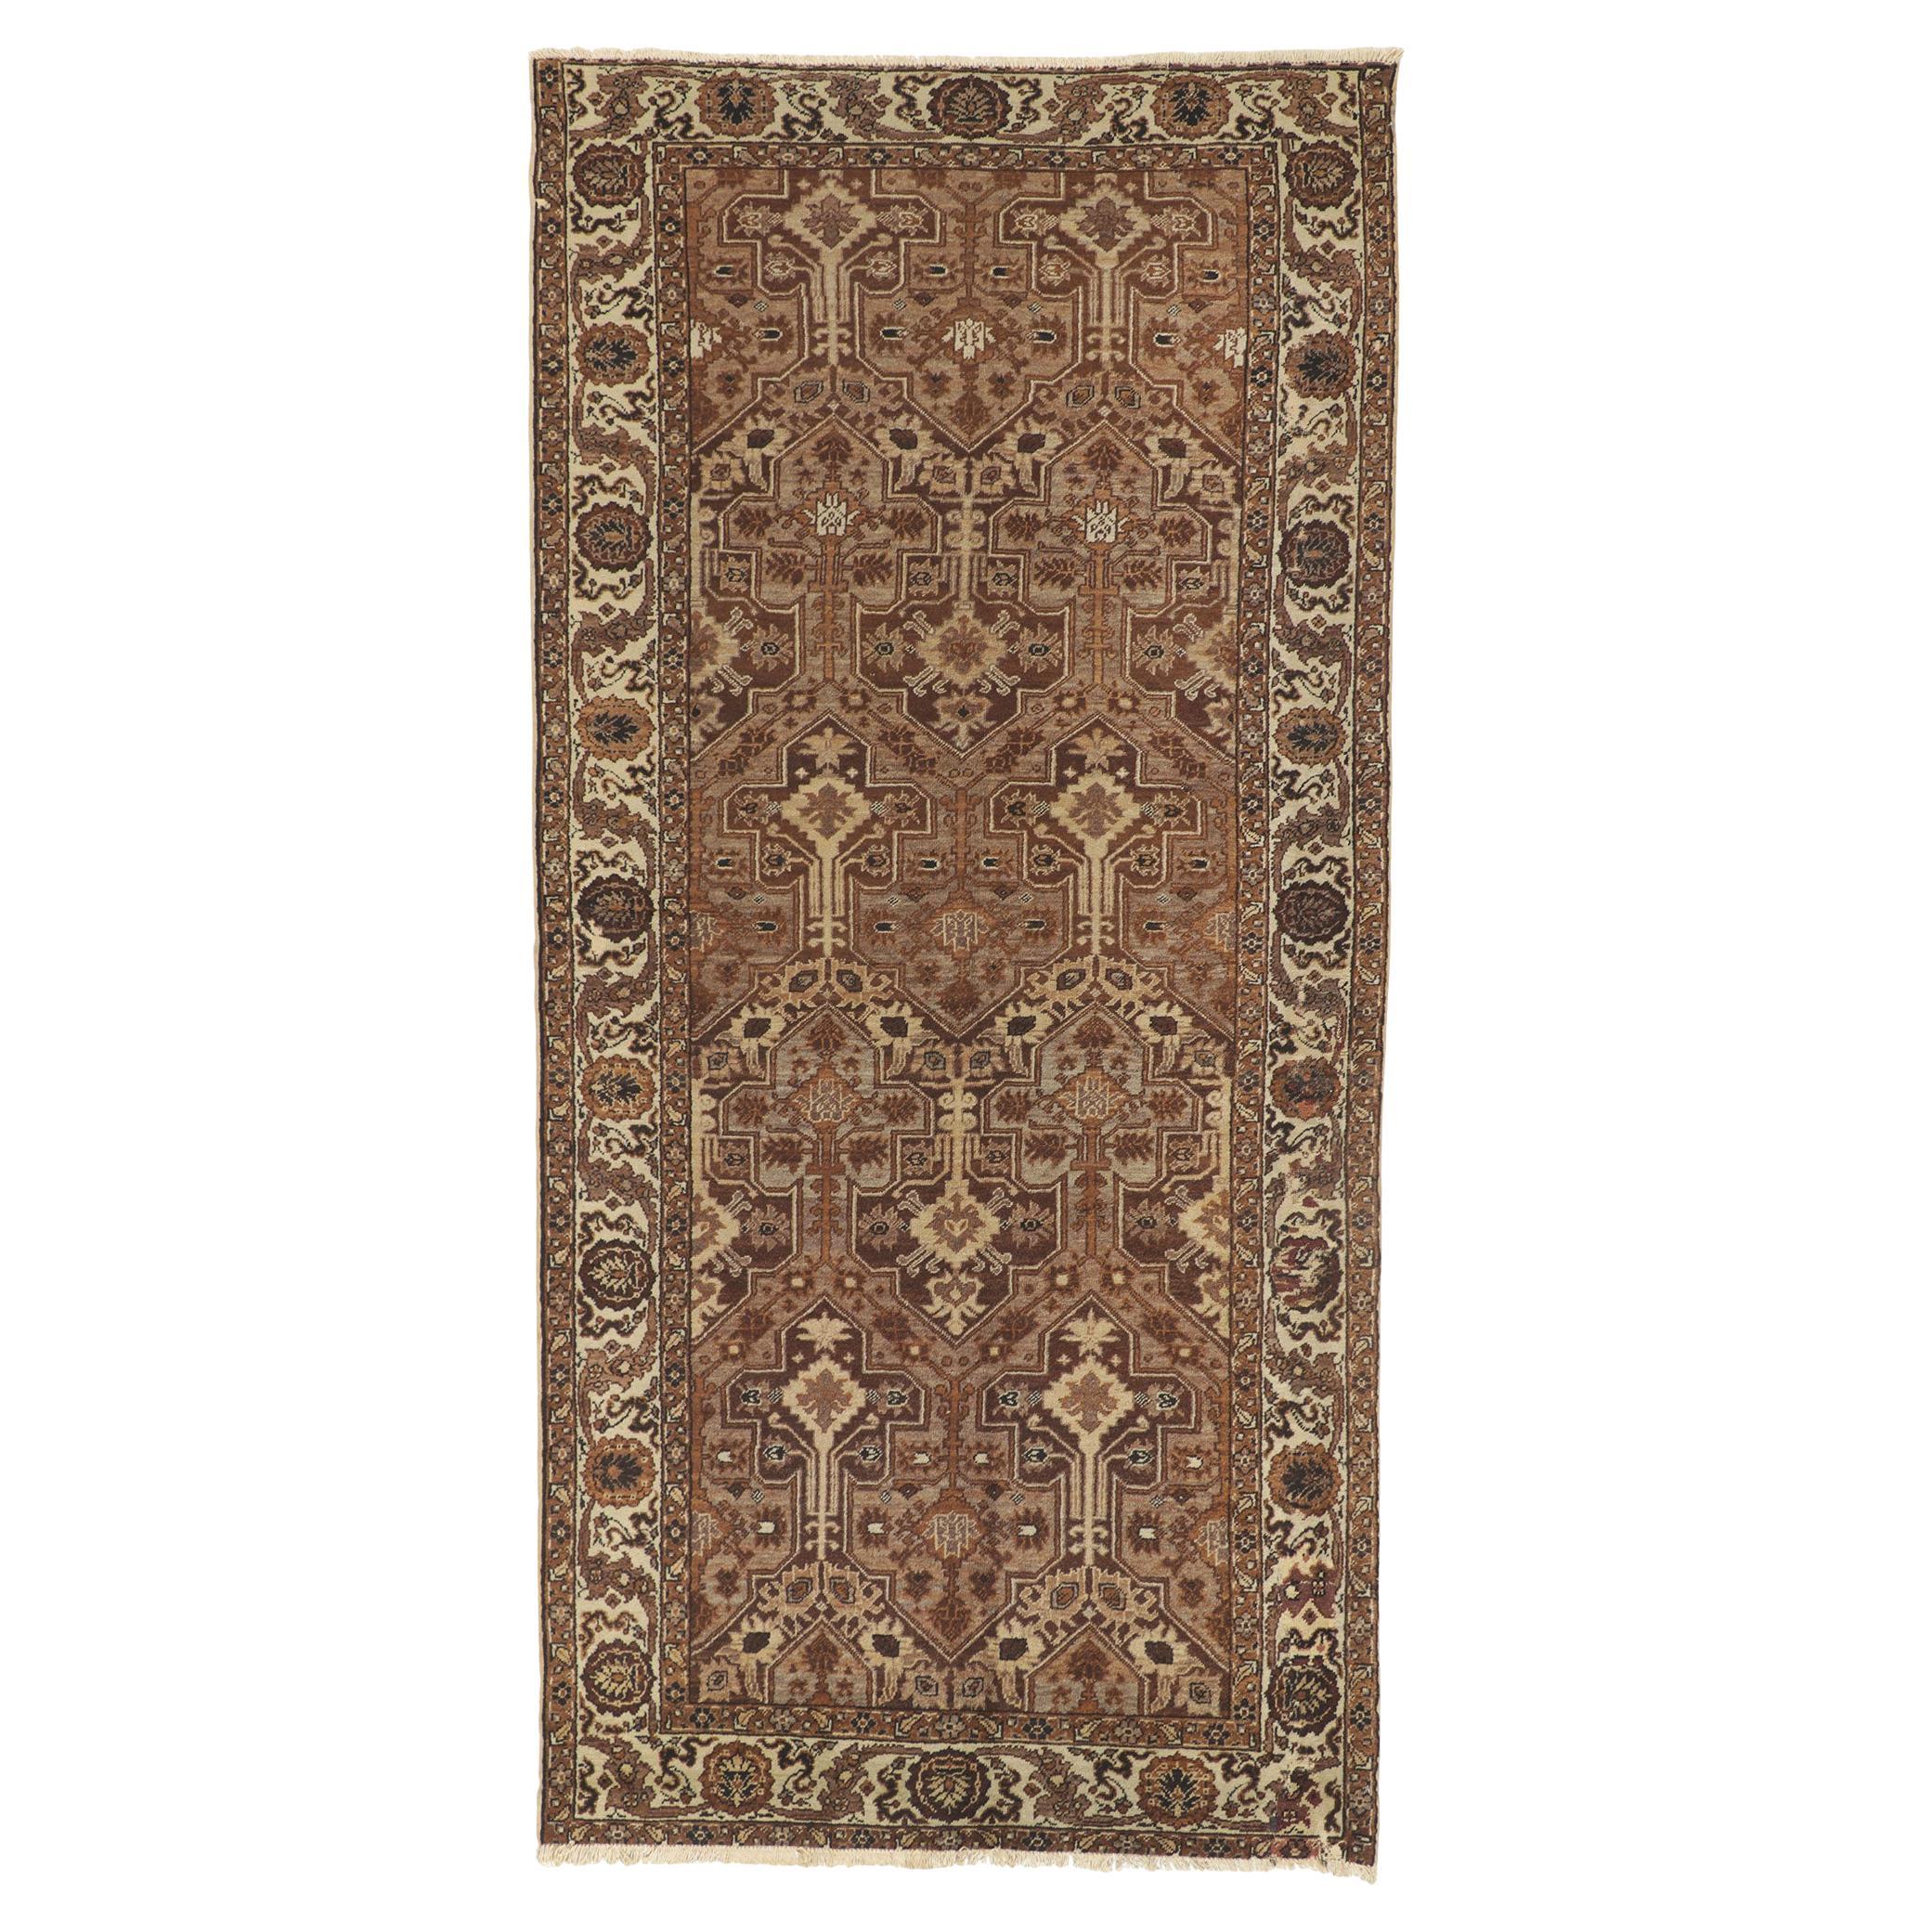 Vintage Turkish Sivas Rug with Warm Earth-Tone Colors For Sale